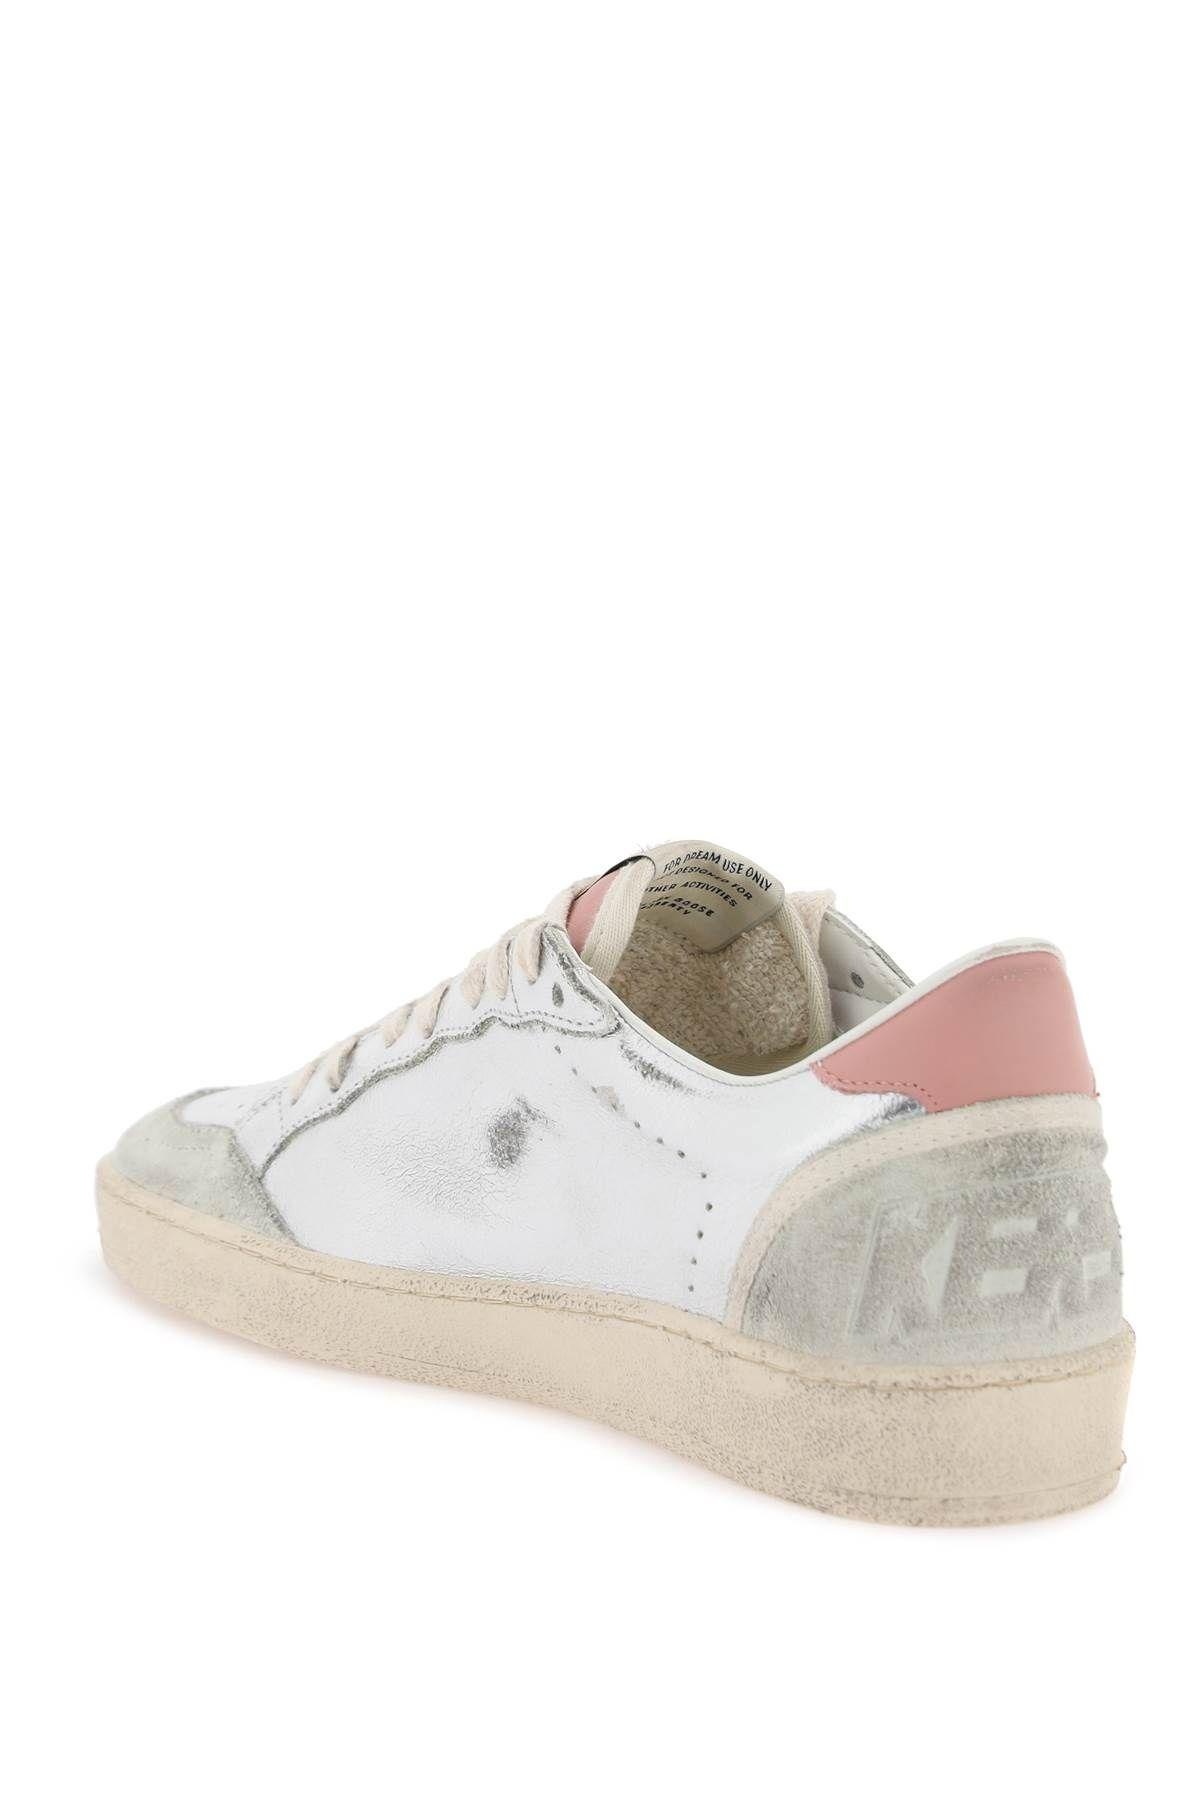 Laminated leather Ball Star sneakers Golden Goose - 2